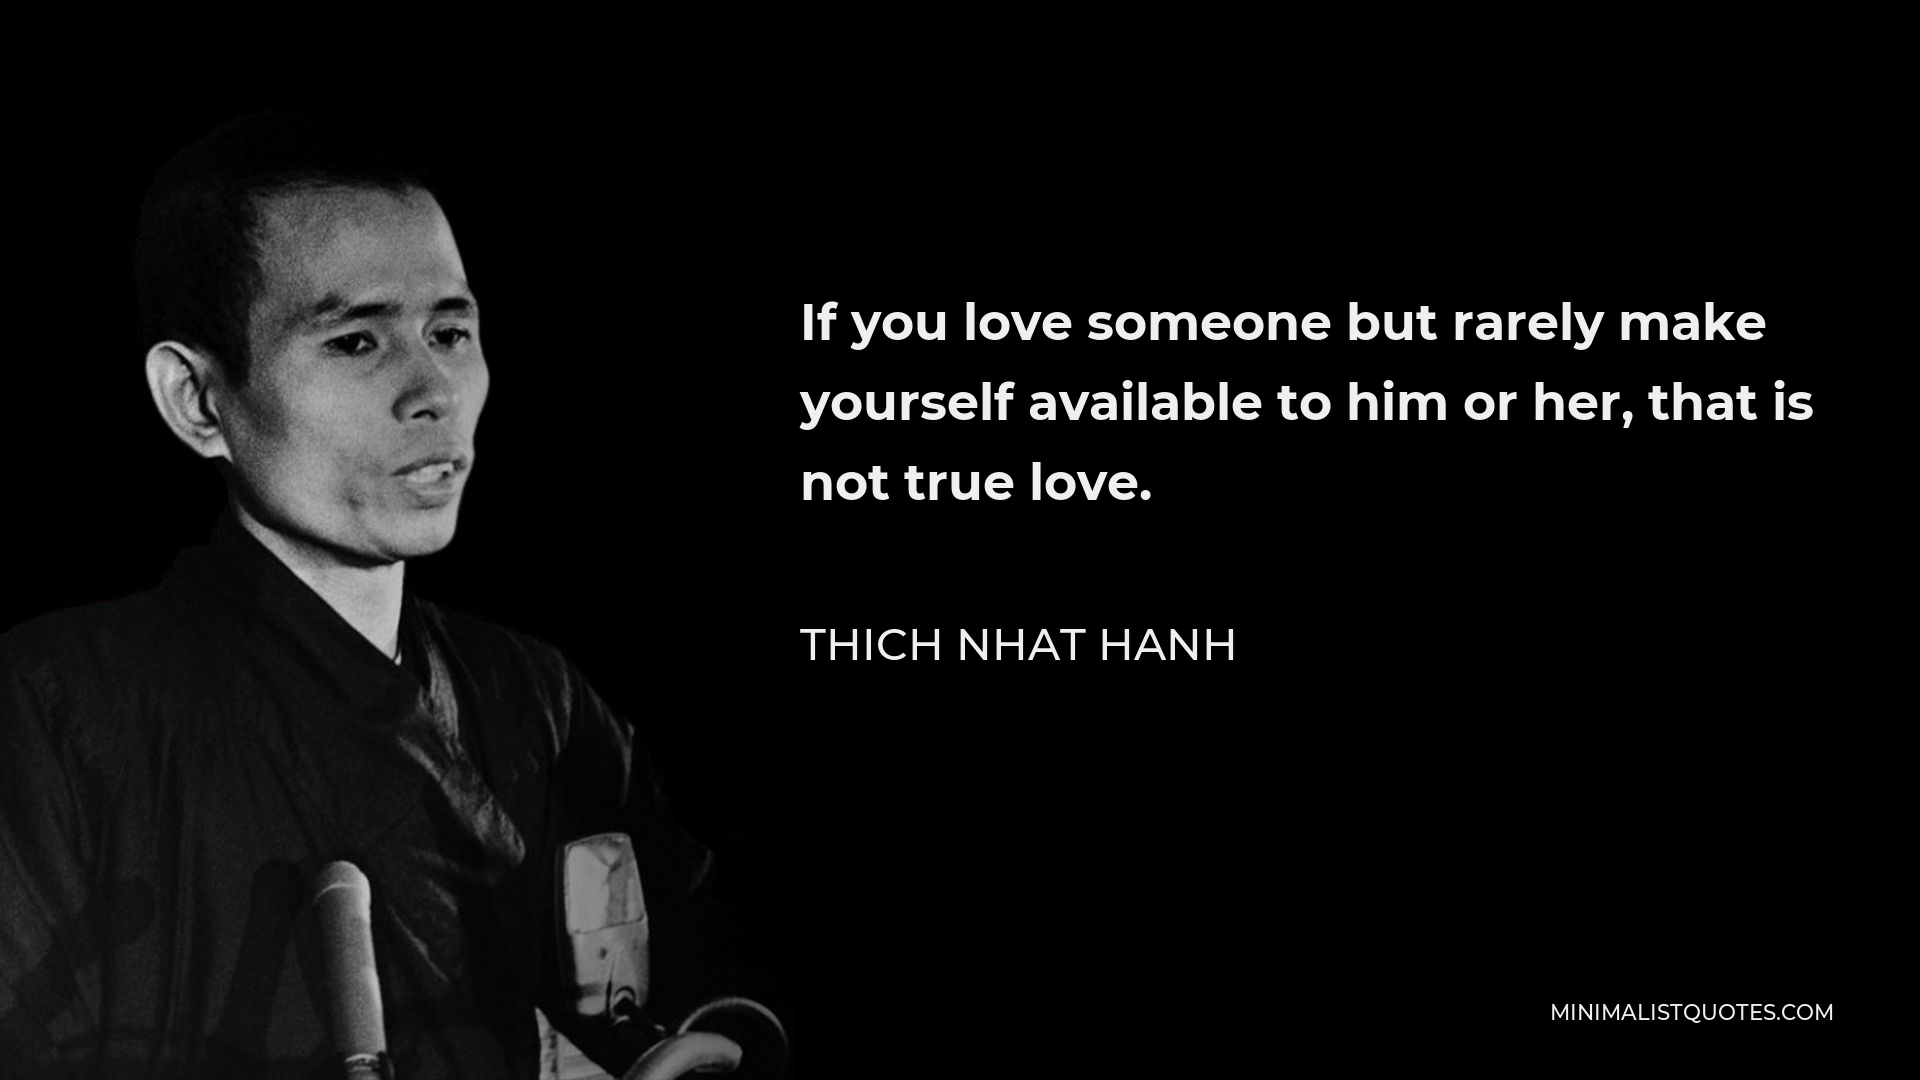 Thich Nhat Hanh Quote - If you love someone but rarely make yourself available to him or her, that is not true love.